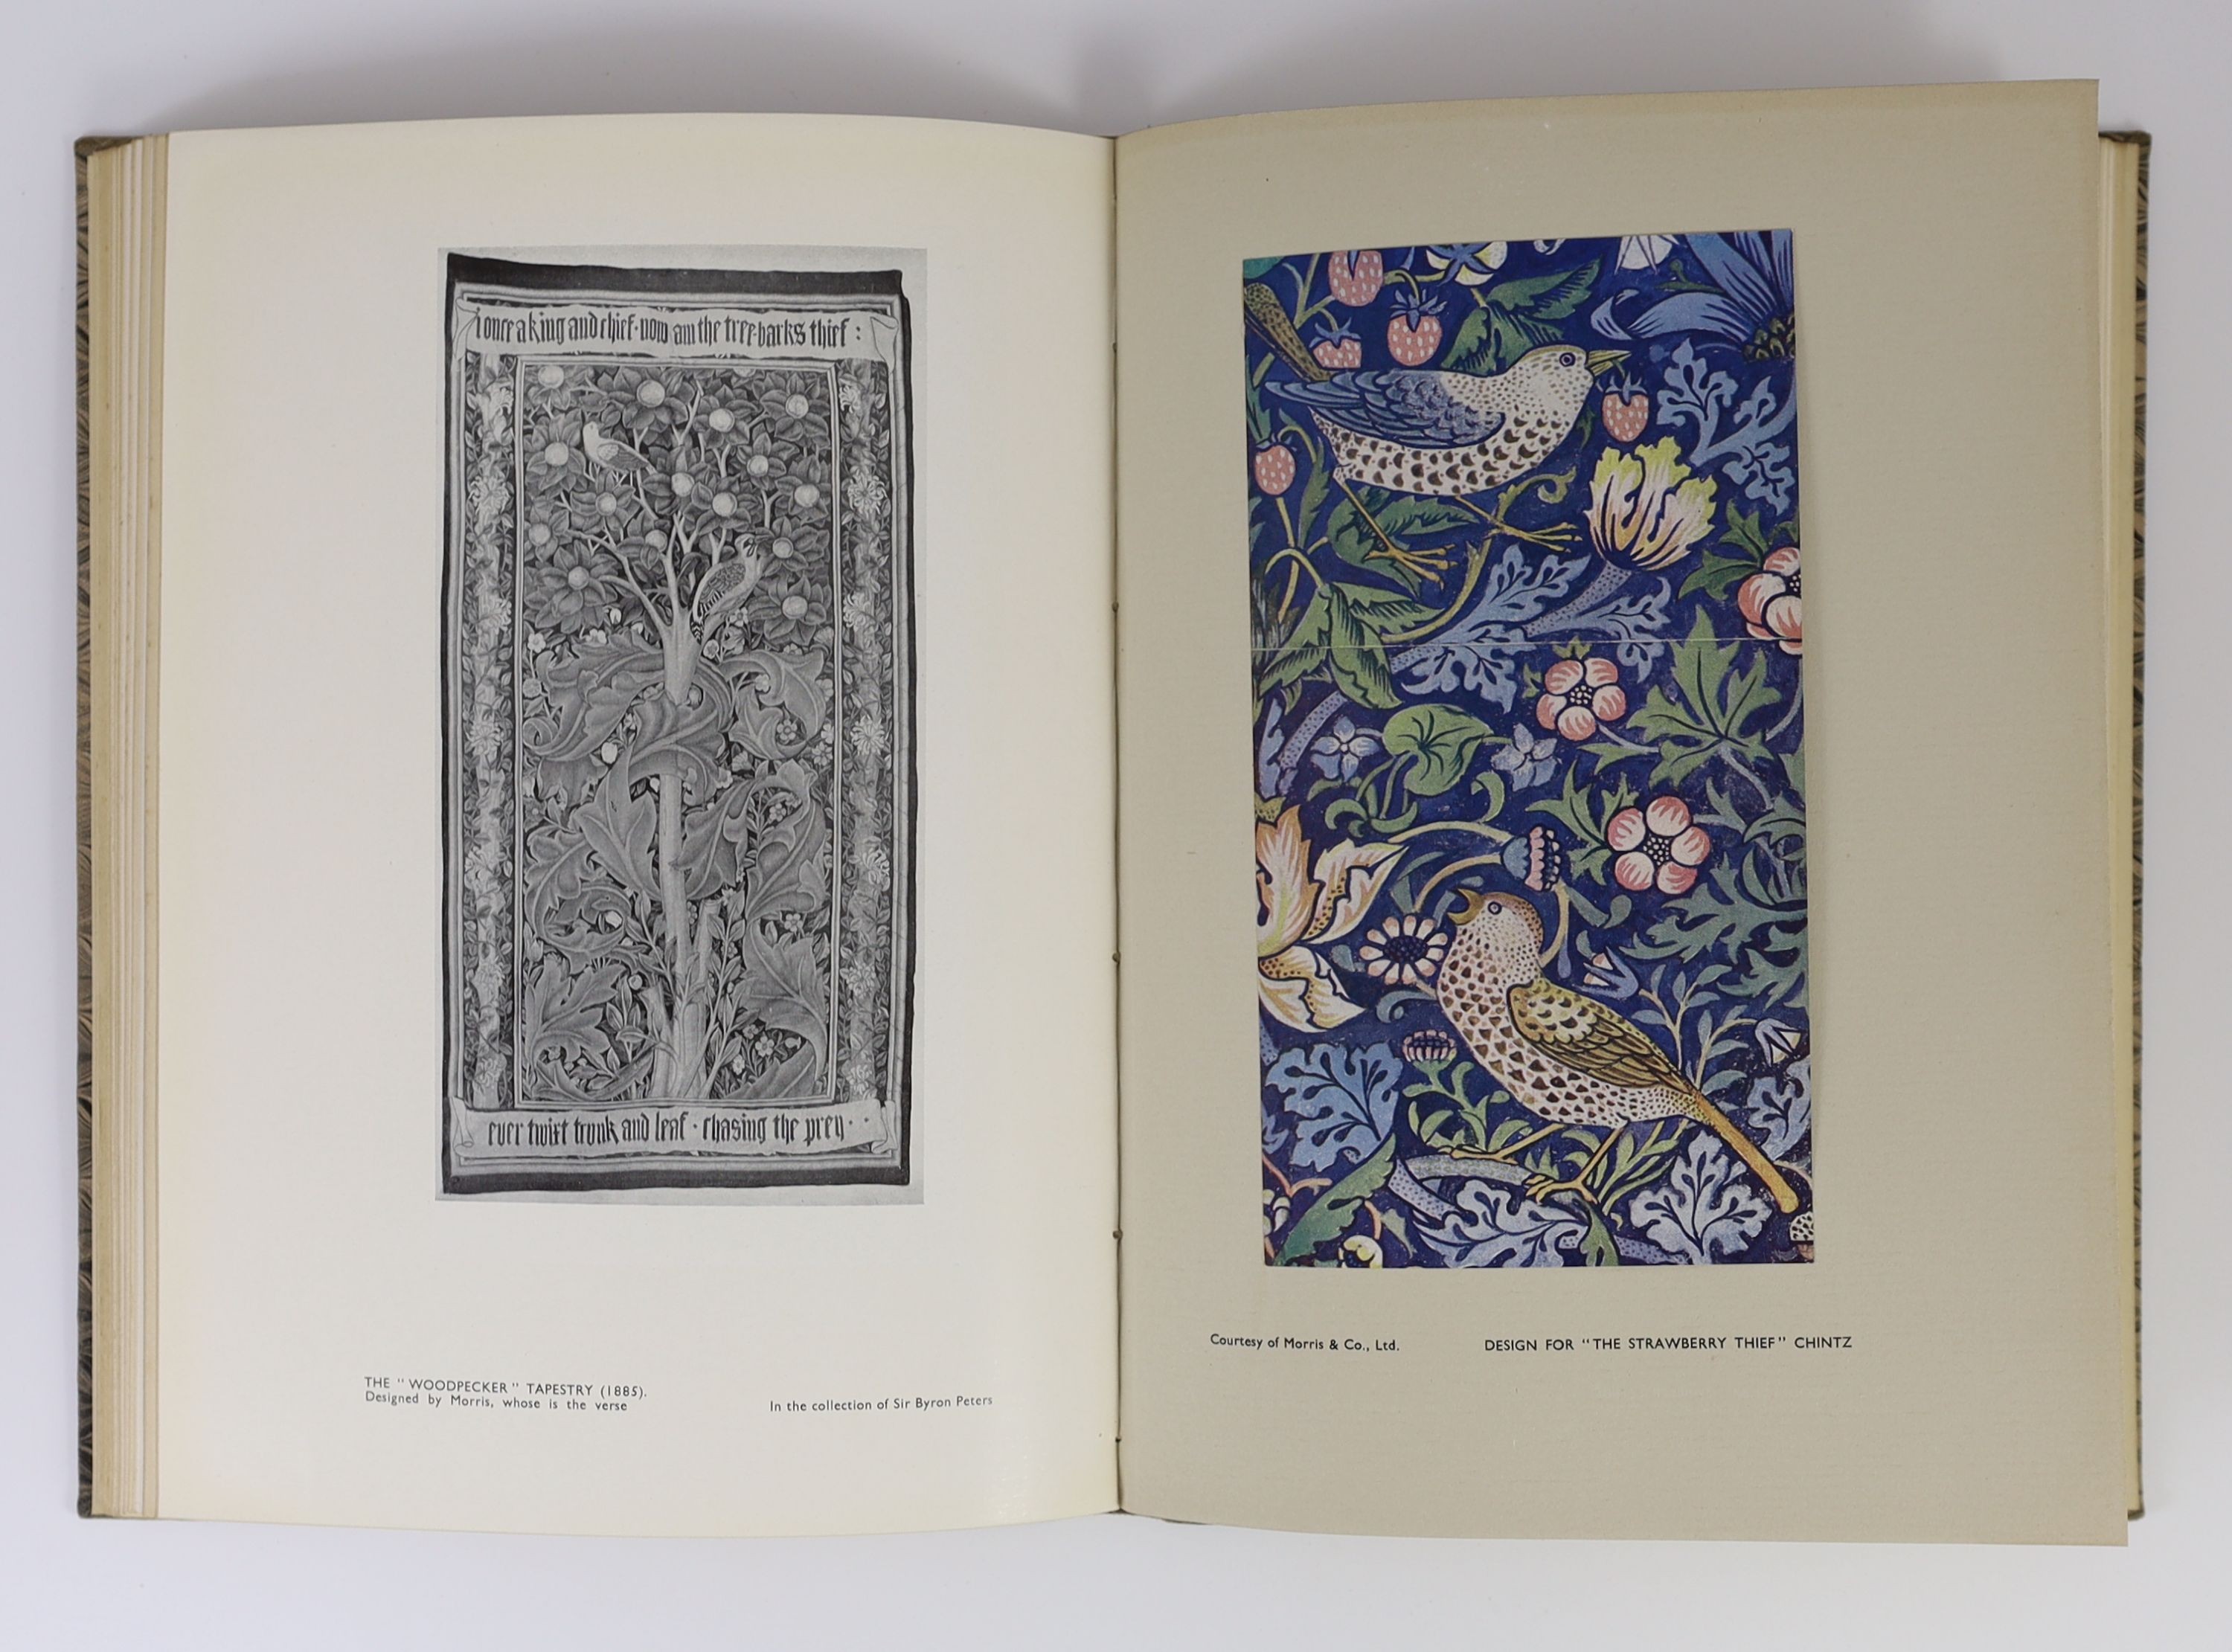 Nonesuch Press - Thomson, James - The Seasons, one of 1500, 4to, marble boards, illustrated by Jacquier, London, 1927 and Crow, Gerald Henry - William Morris Designer, 4to, cloth, The Studio, London, 1934 (2)